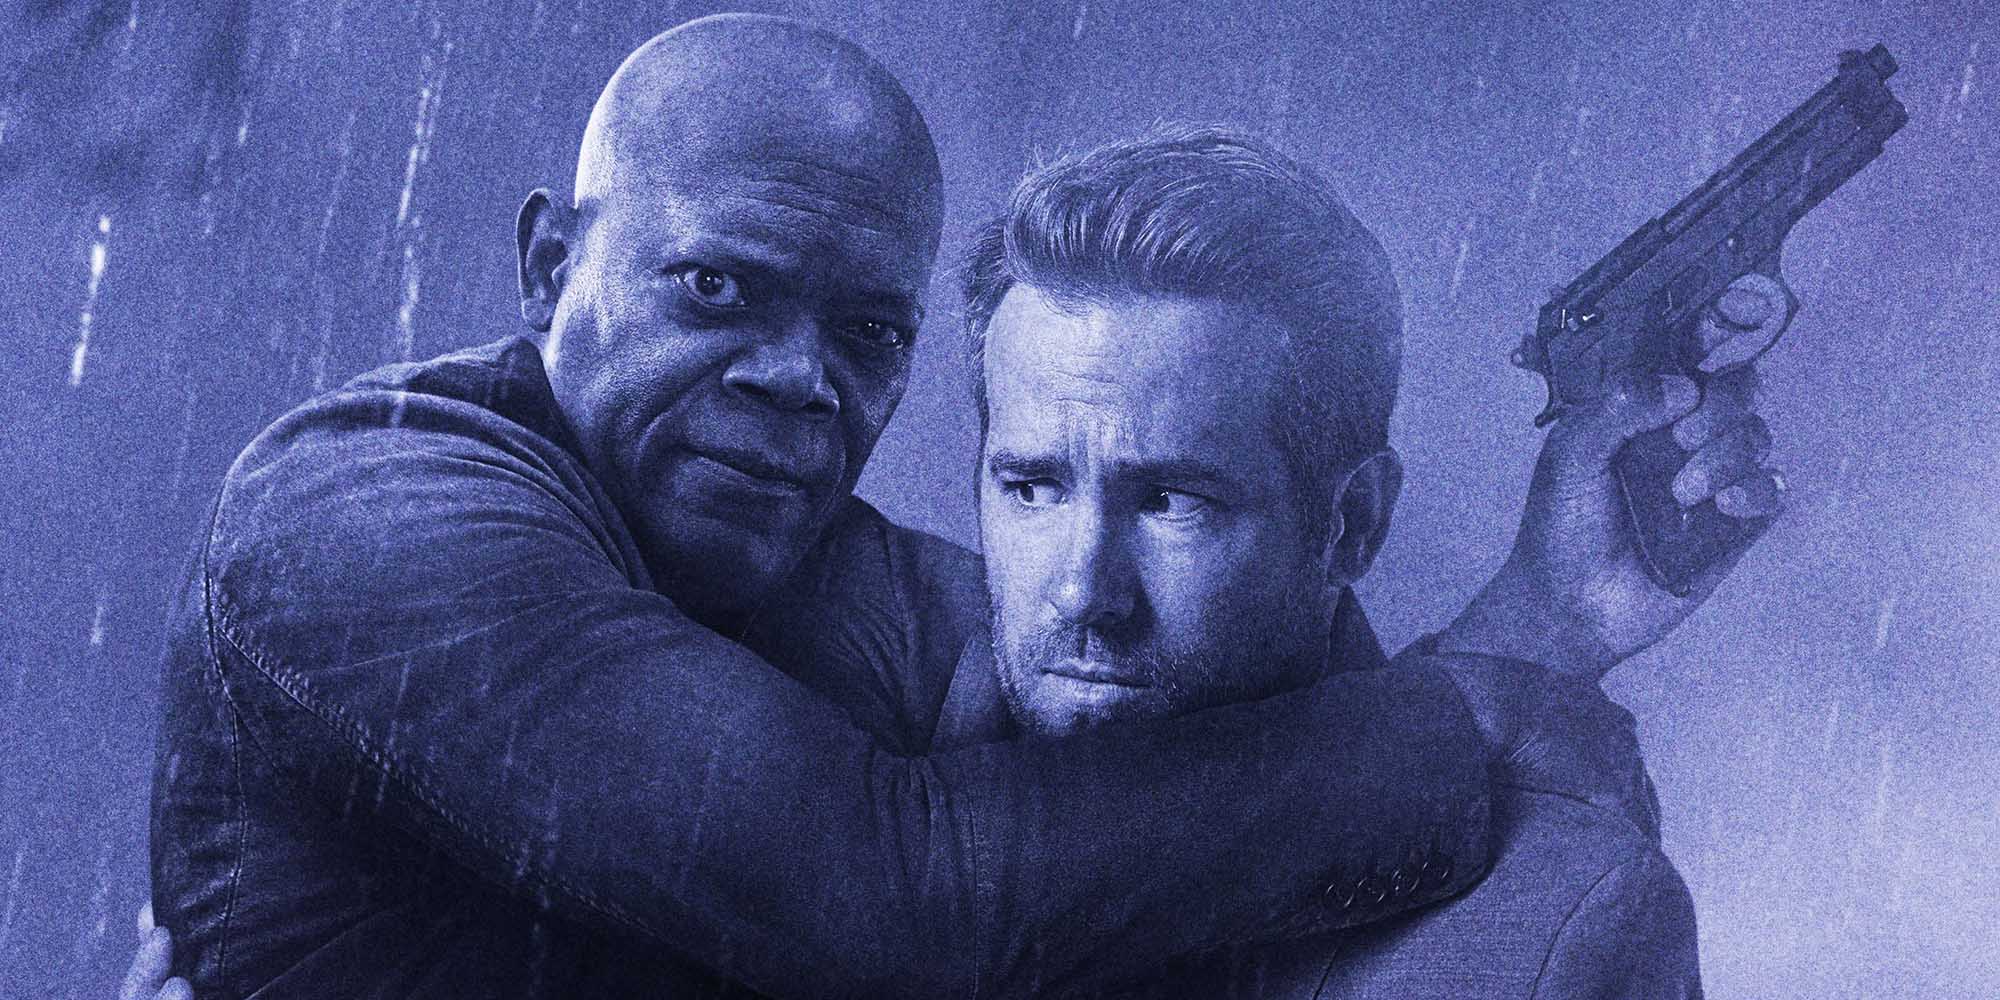 The Hitman's Bodyguard has all the makings of a fun summer hit